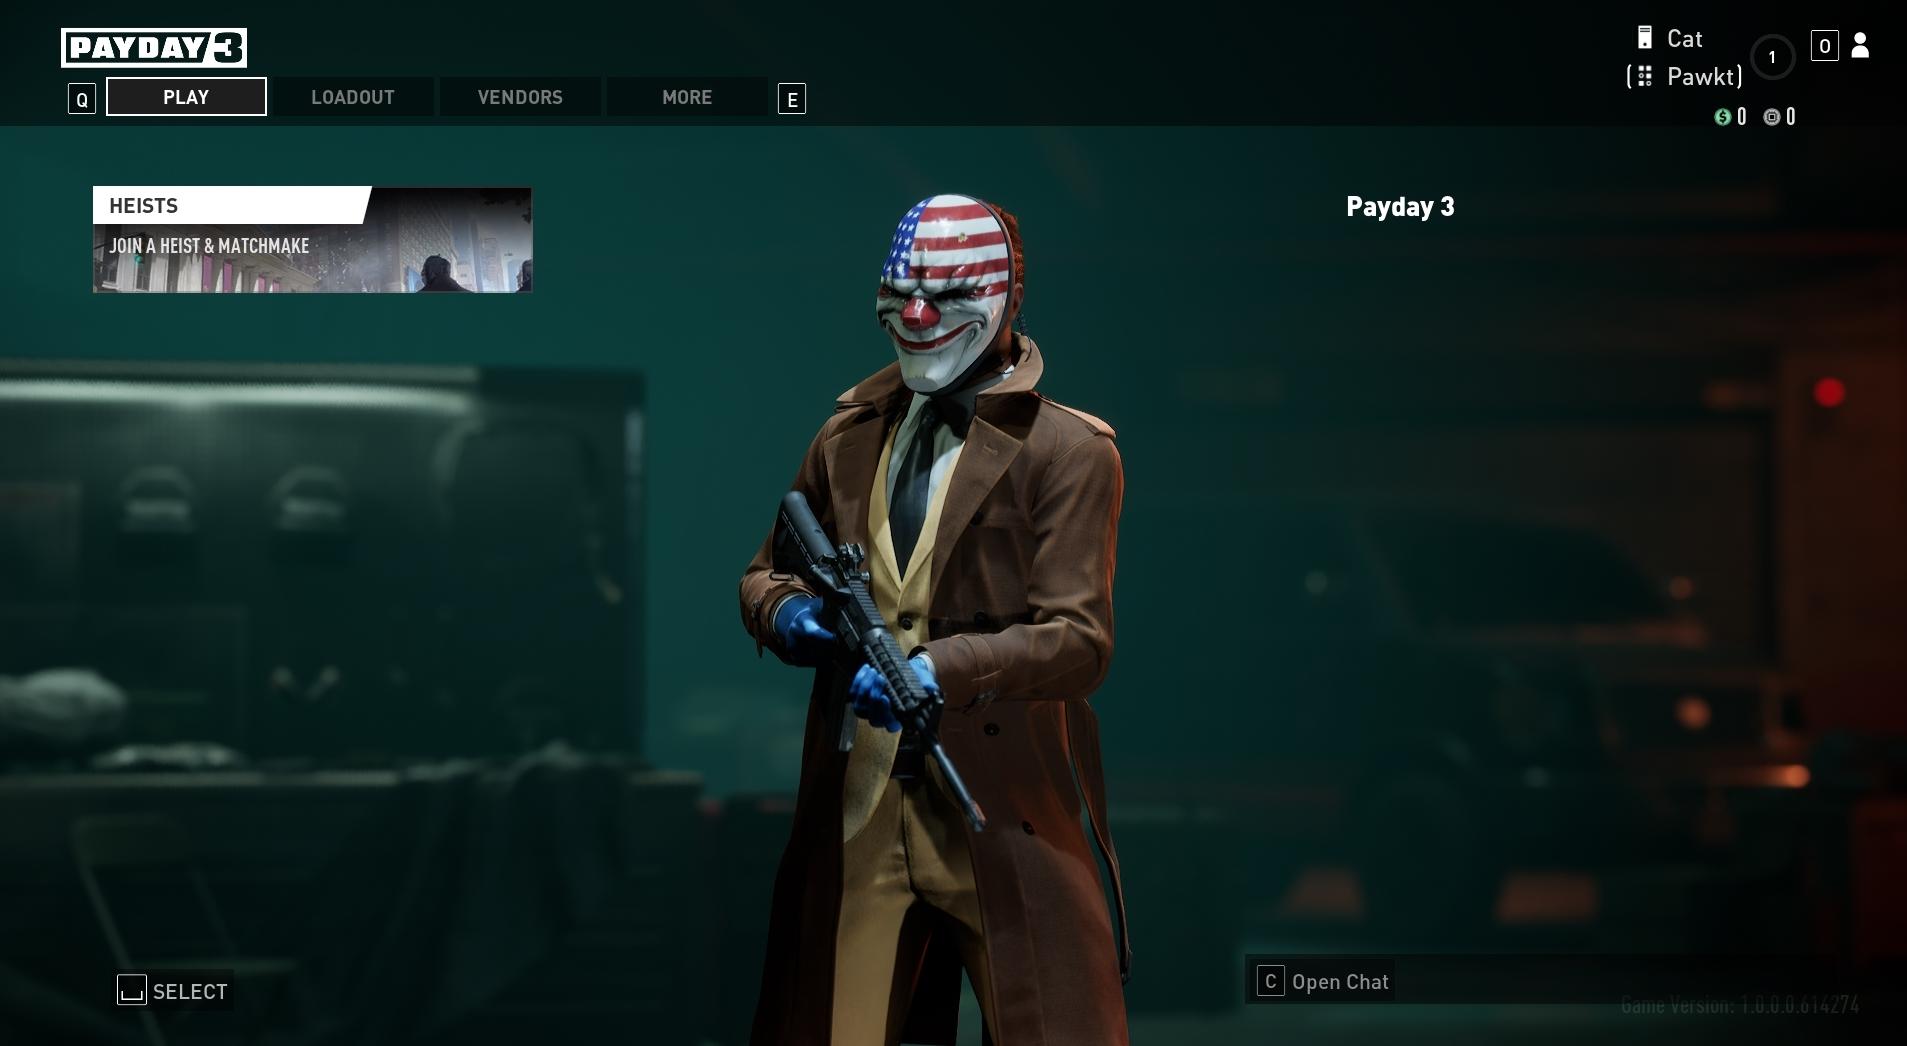 Payday 3 out in September